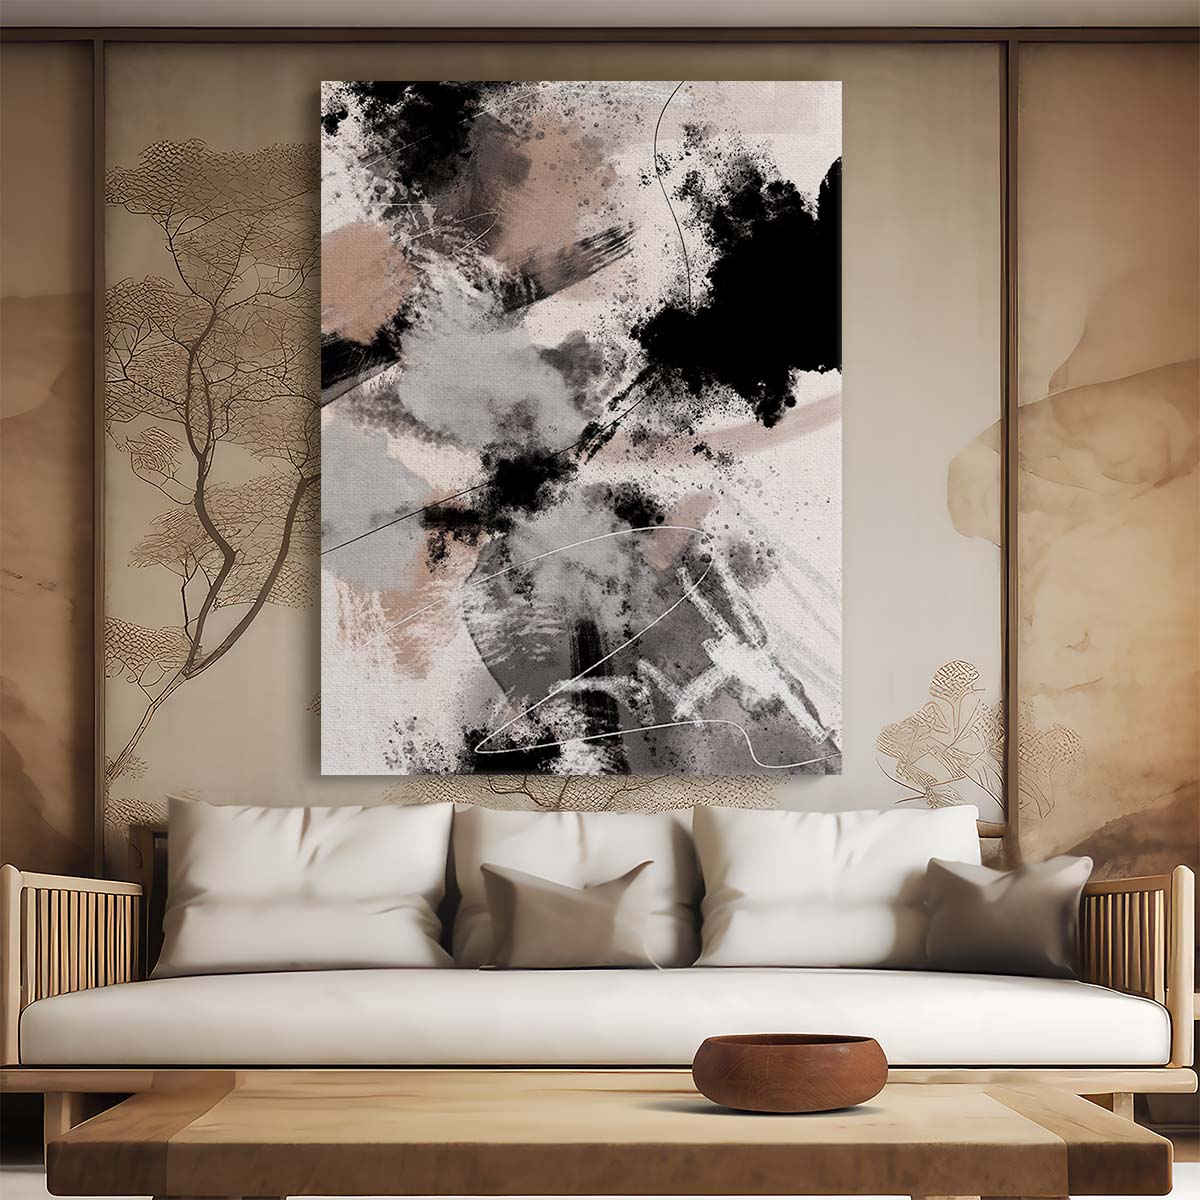 Abstract Geometric Splash Storm Illustration Painting in Beige by Luxuriance Designs, made in USA